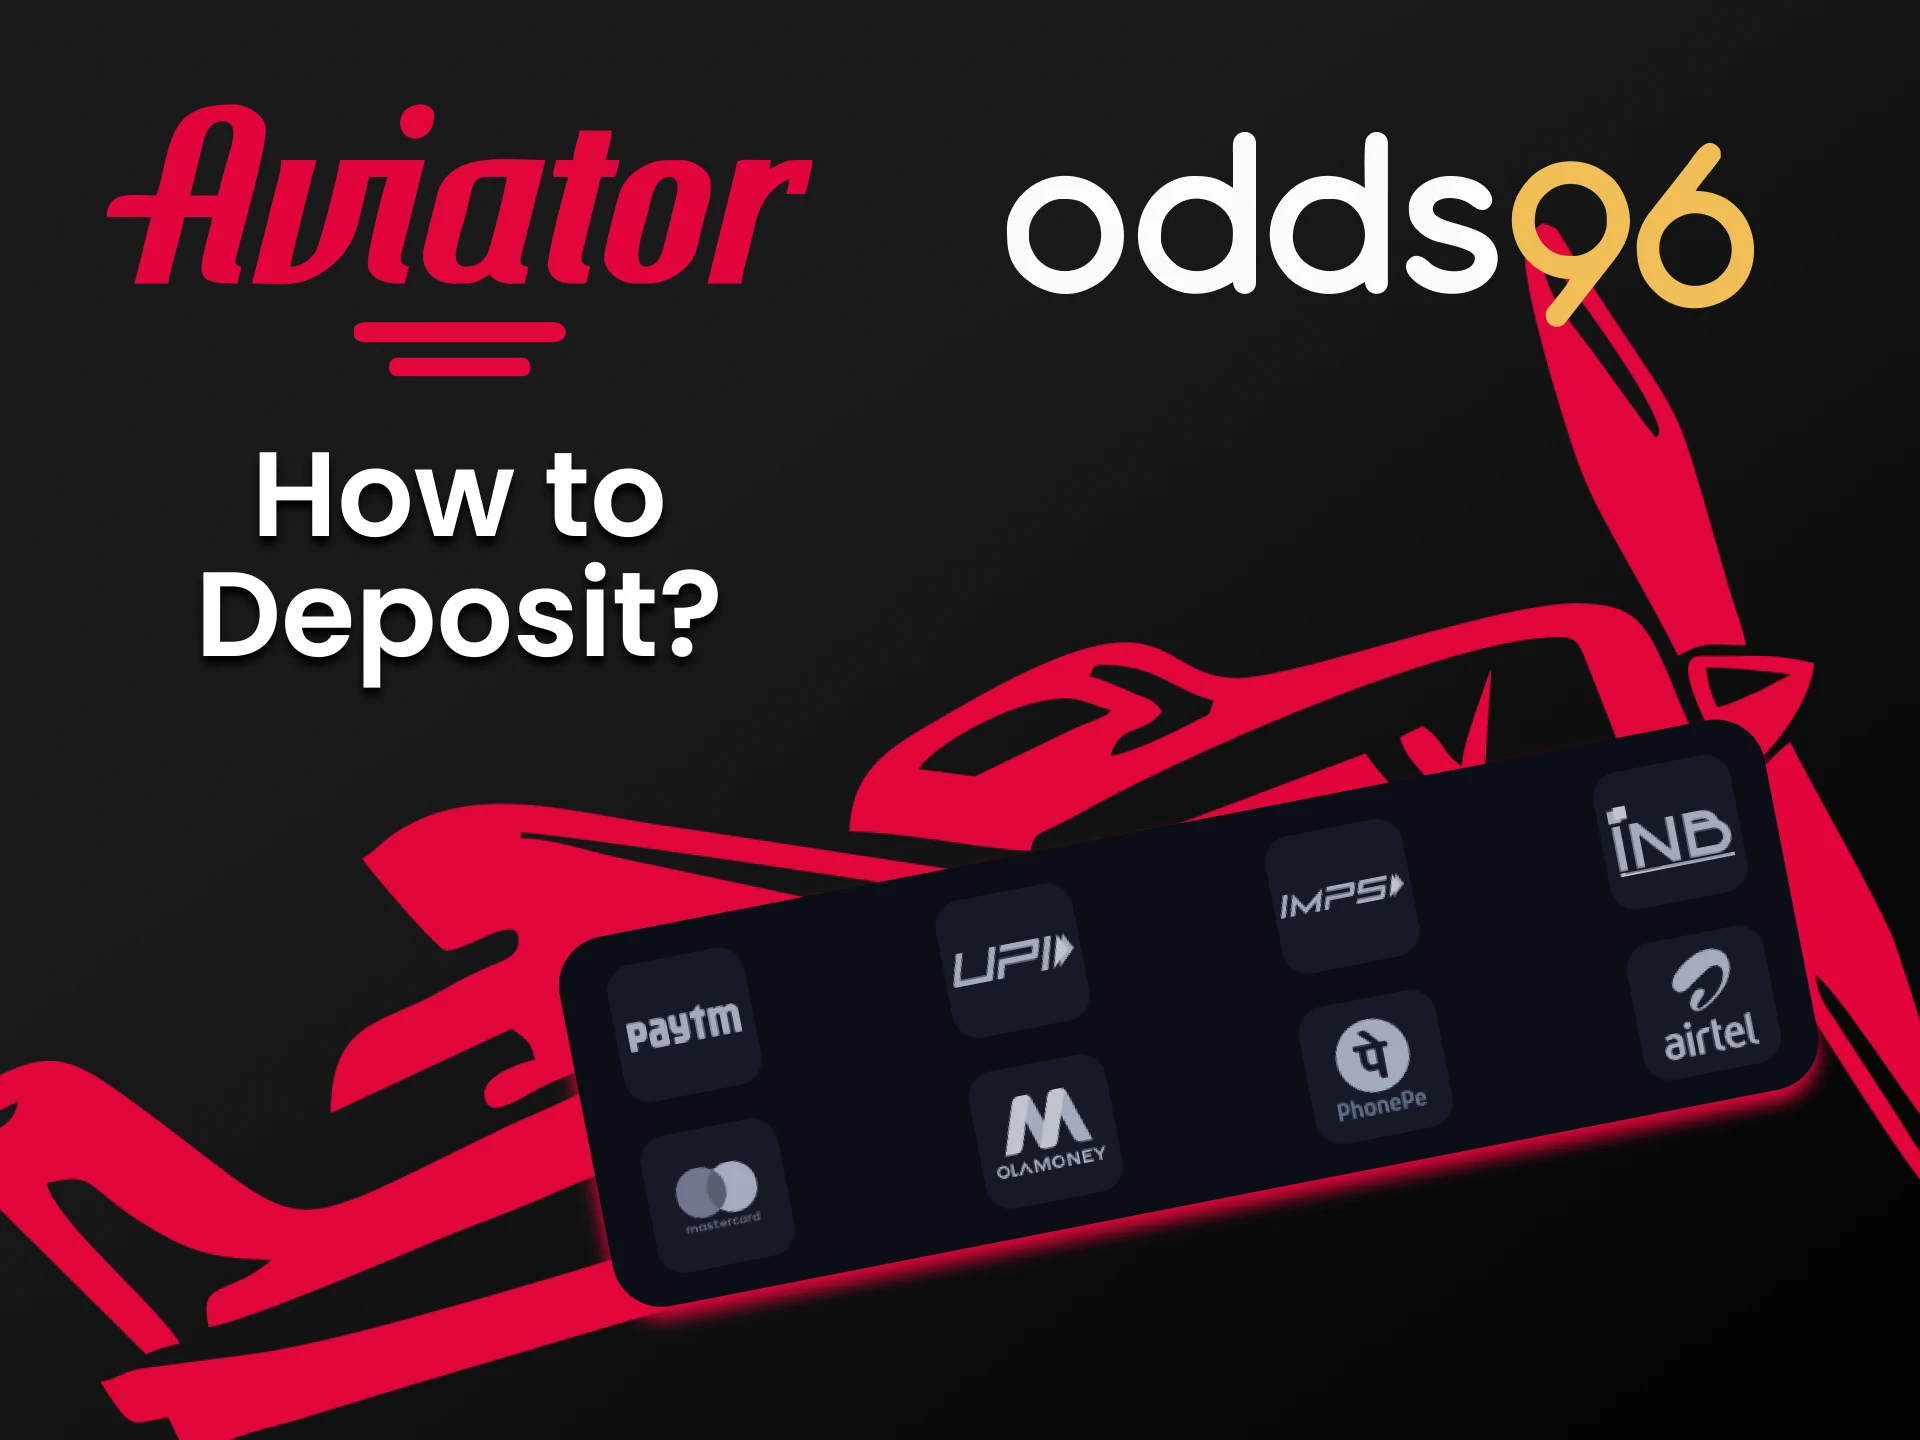 Deposit funds in a convenient way from Odds96.